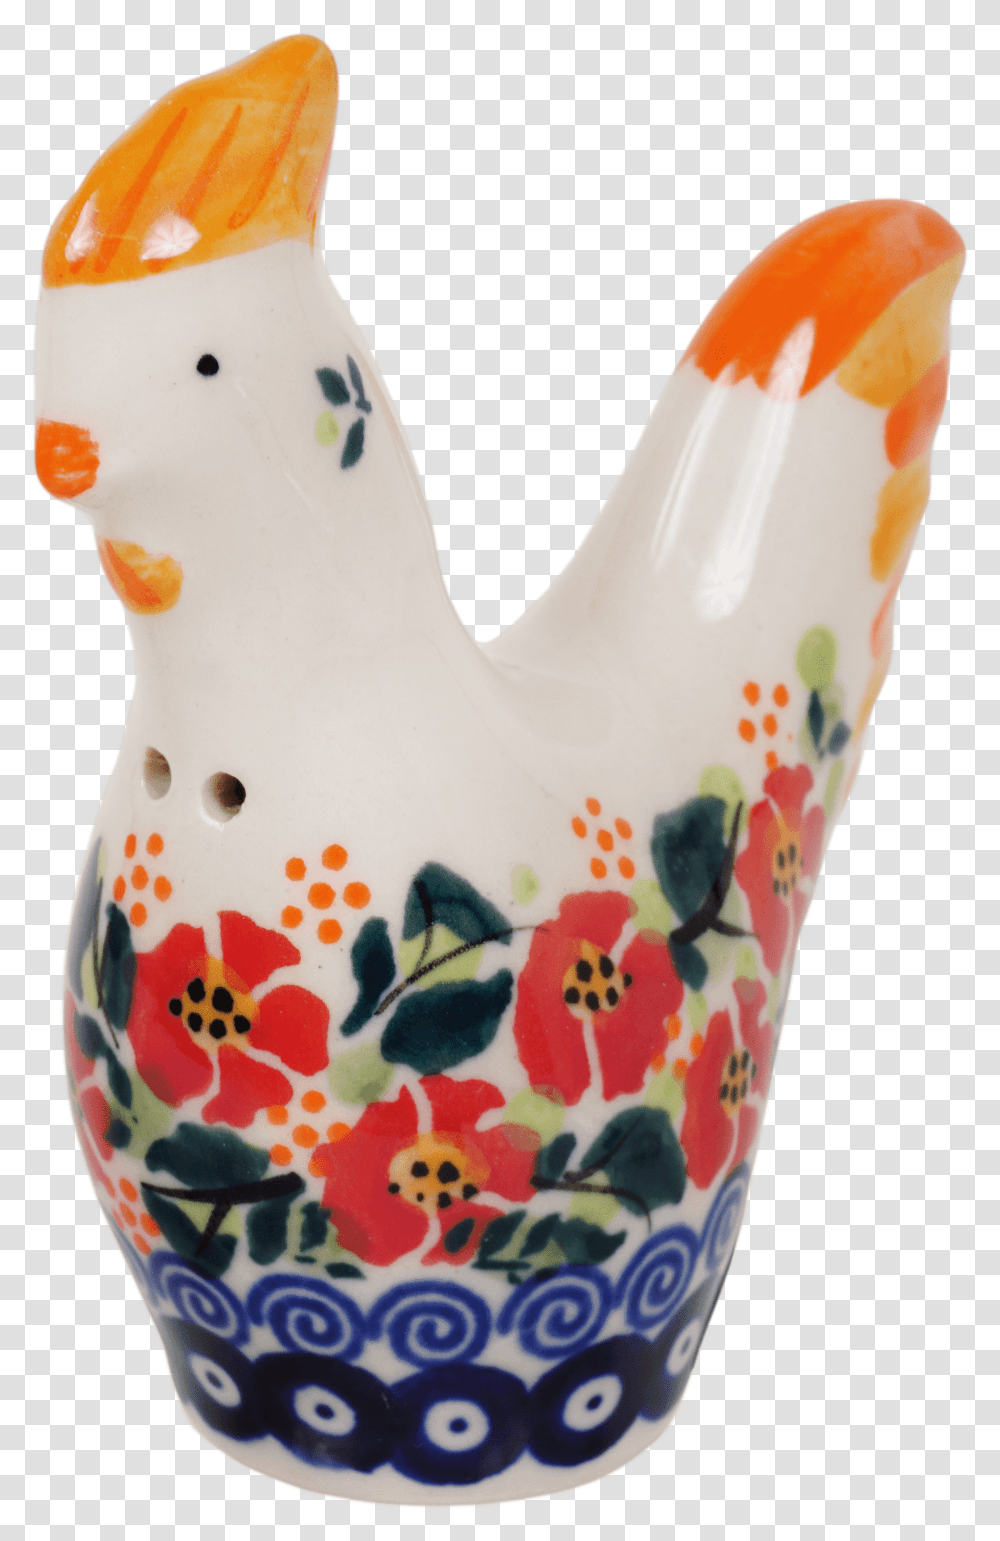 Skinny Chicken Saltpepper Shaker Rooster, Snowman, Outdoors, Nature, Sweets Transparent Png